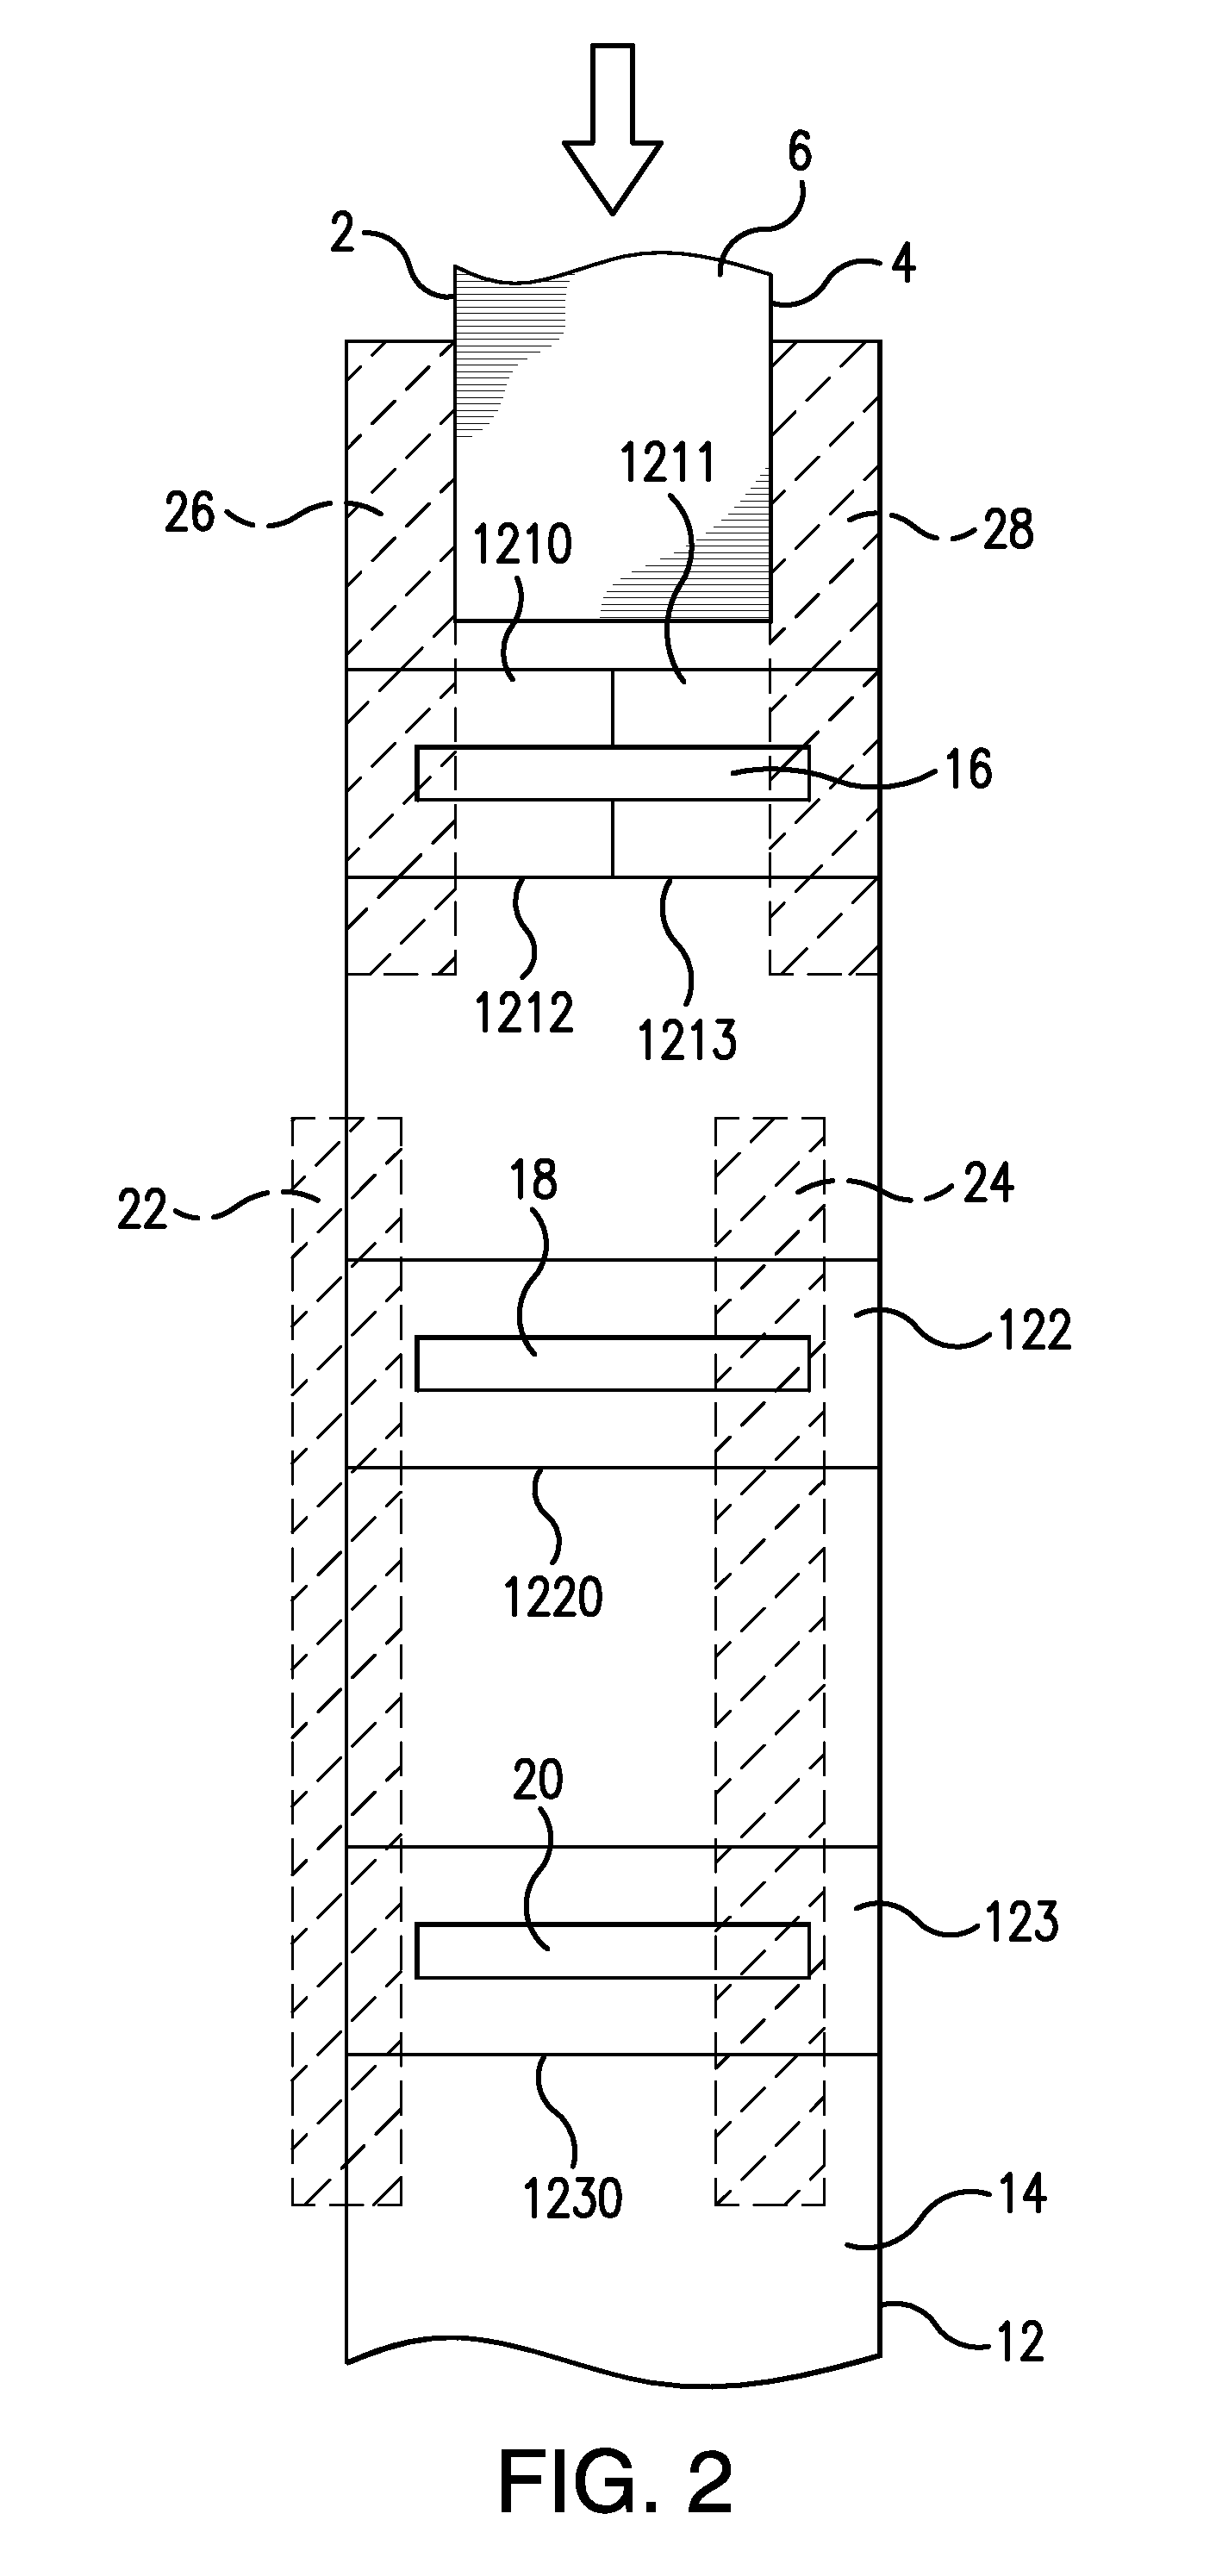 Method For Mechanically Scraping Boards, Apparatus For Same, and Products Made Therewith